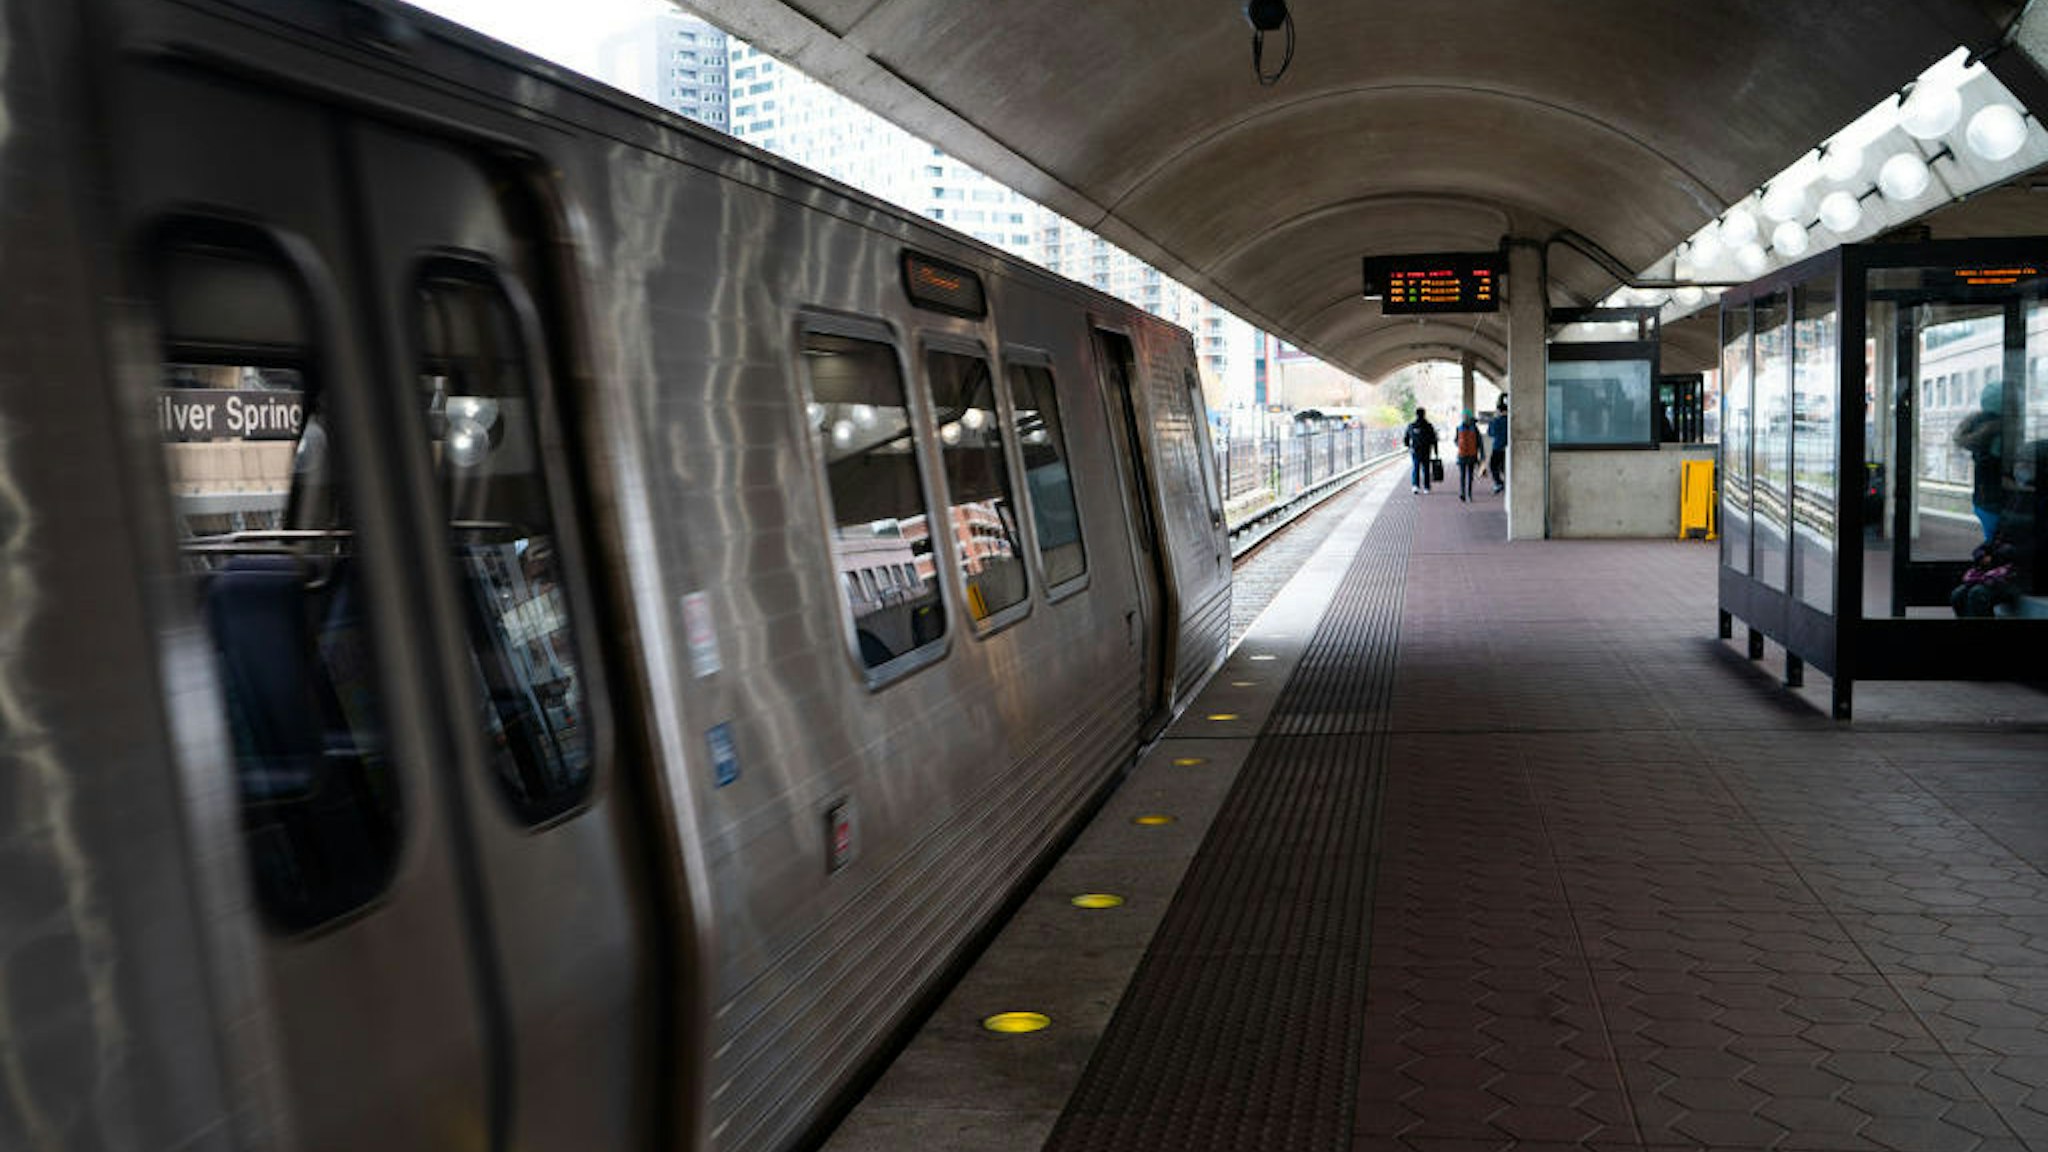 SILVER SPRING, MD - DECEMBER 1: The Silver Spring Red Line Metrorail station in Silver Spring, MD is pictured on December 1, 2020. Metro announced budget cuts amid the coronavirus pandemic. They are proposing a severe reduction in service and up to 19 train stations closing. (Photo by Sarah L. Voisin/The Washington Post)